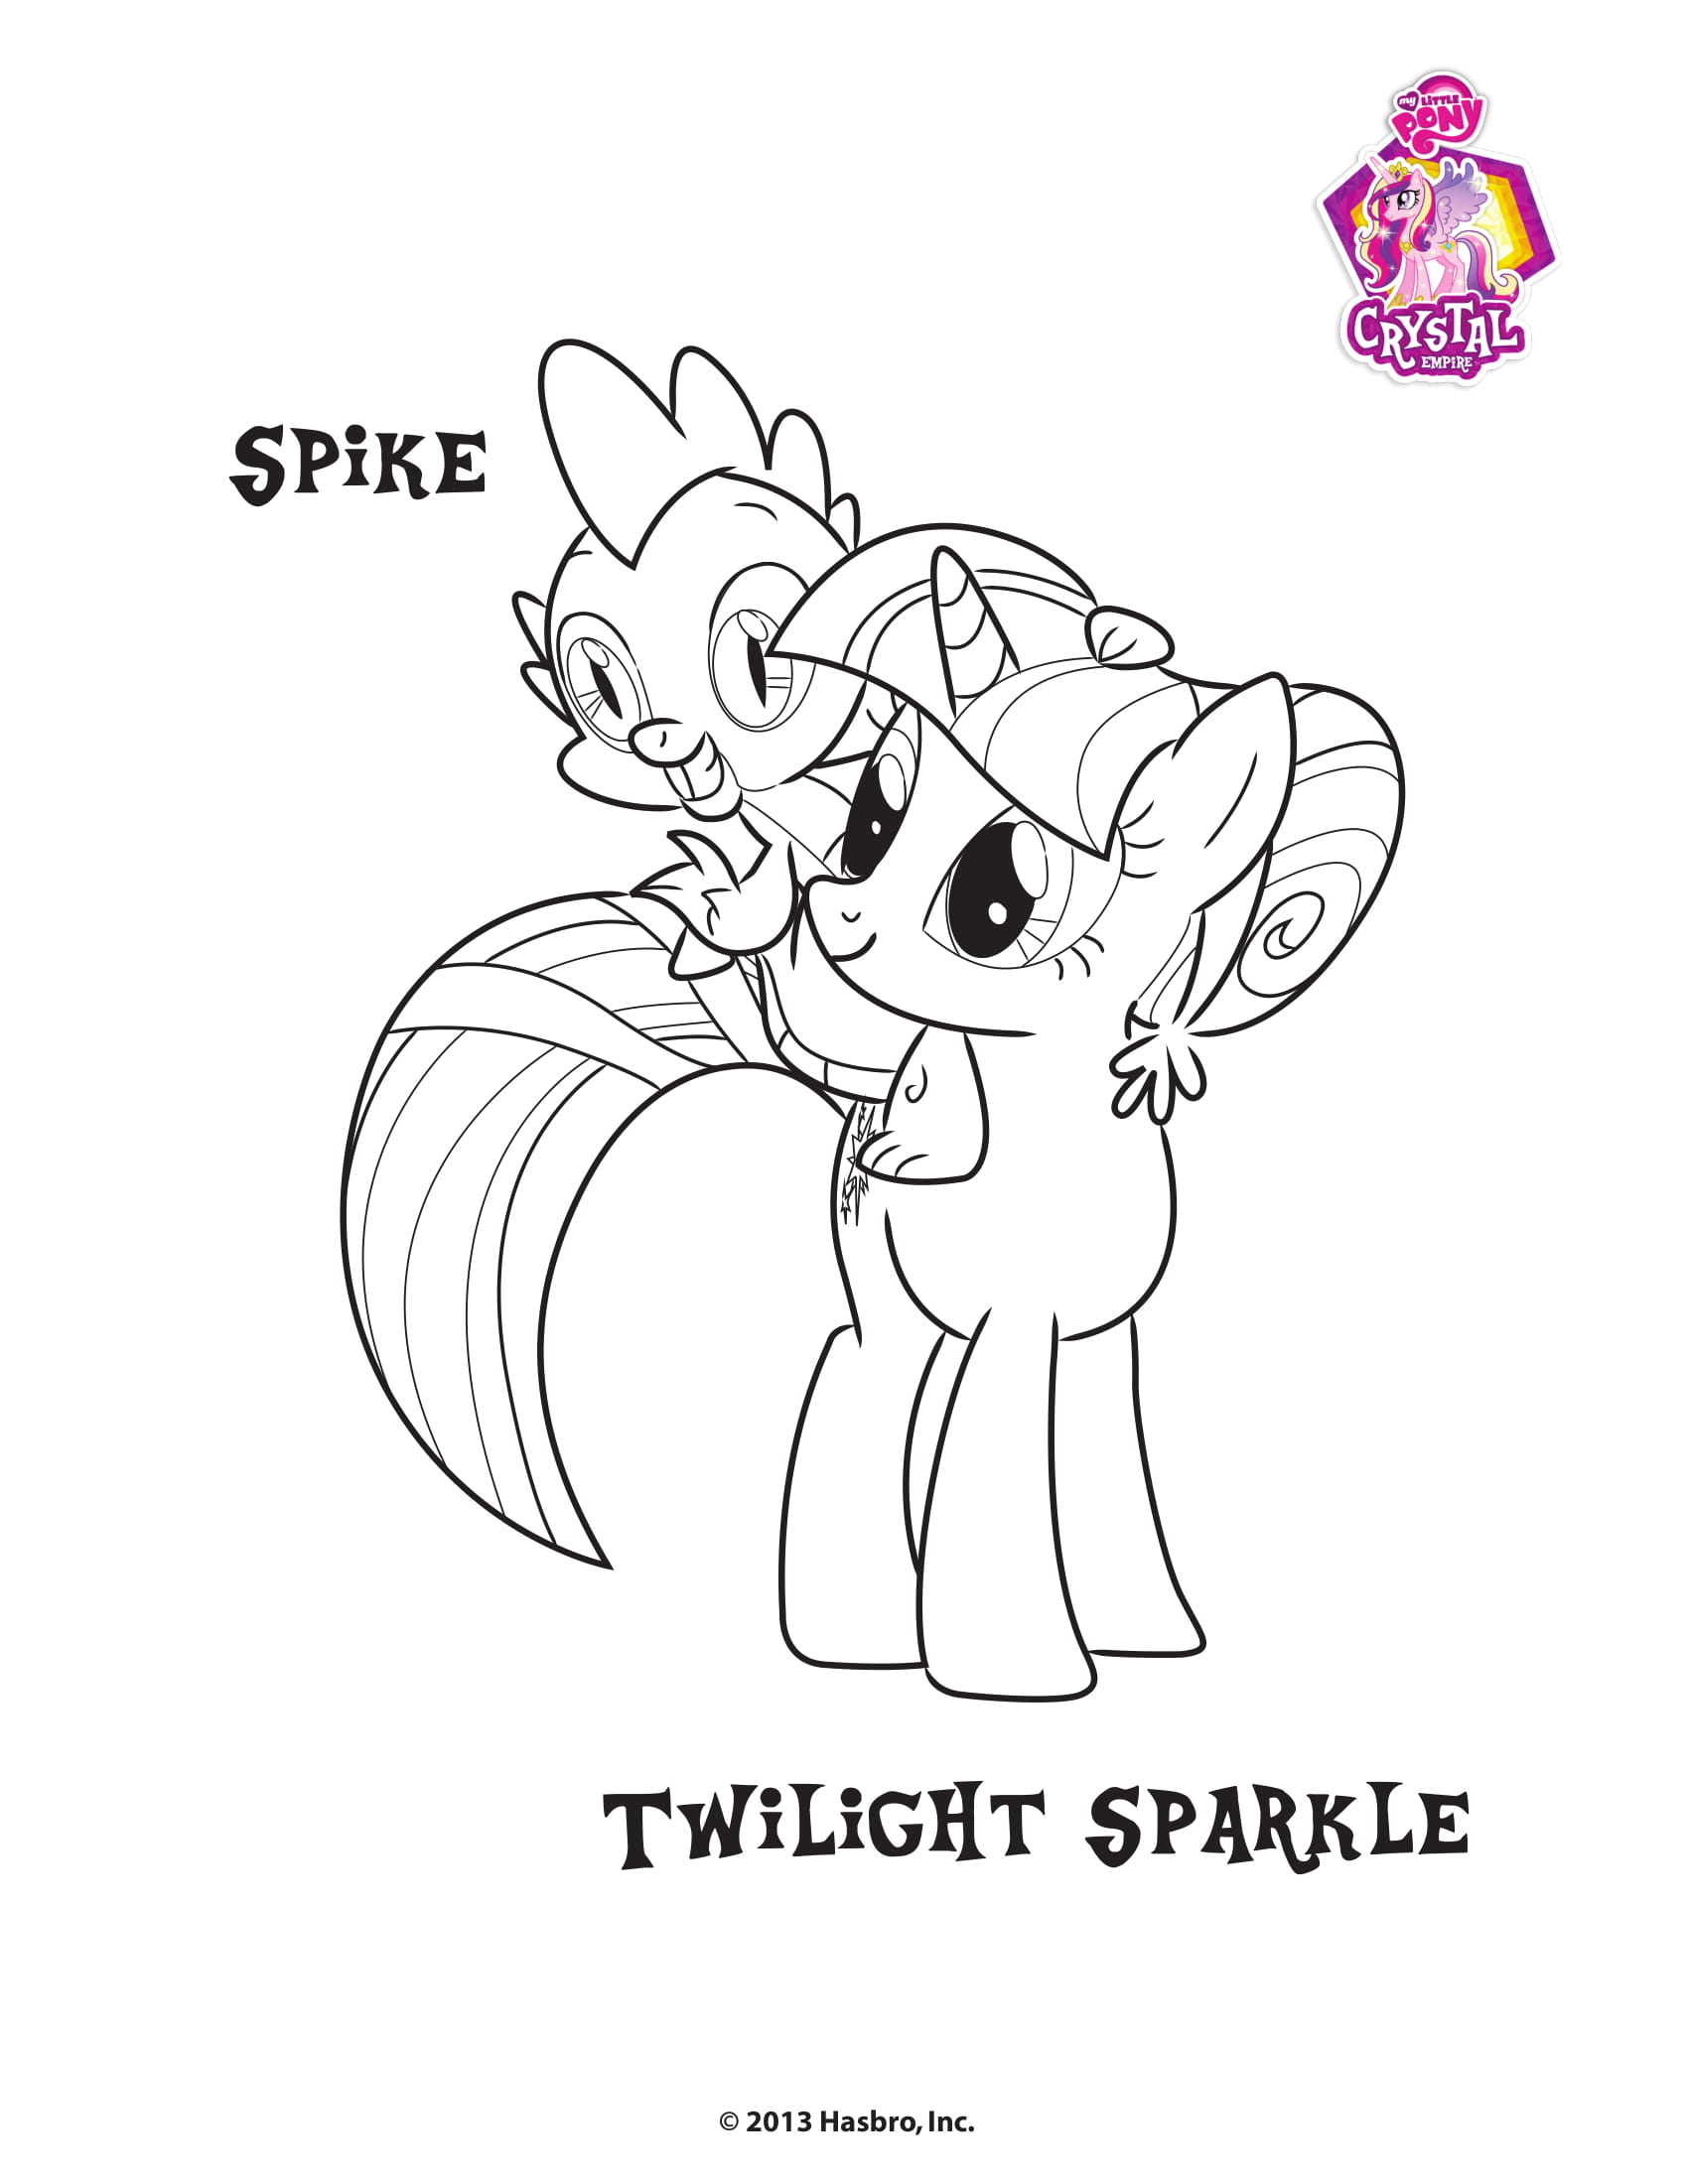 Spike Twilight Sparkle Empire Crystal Coloring Page